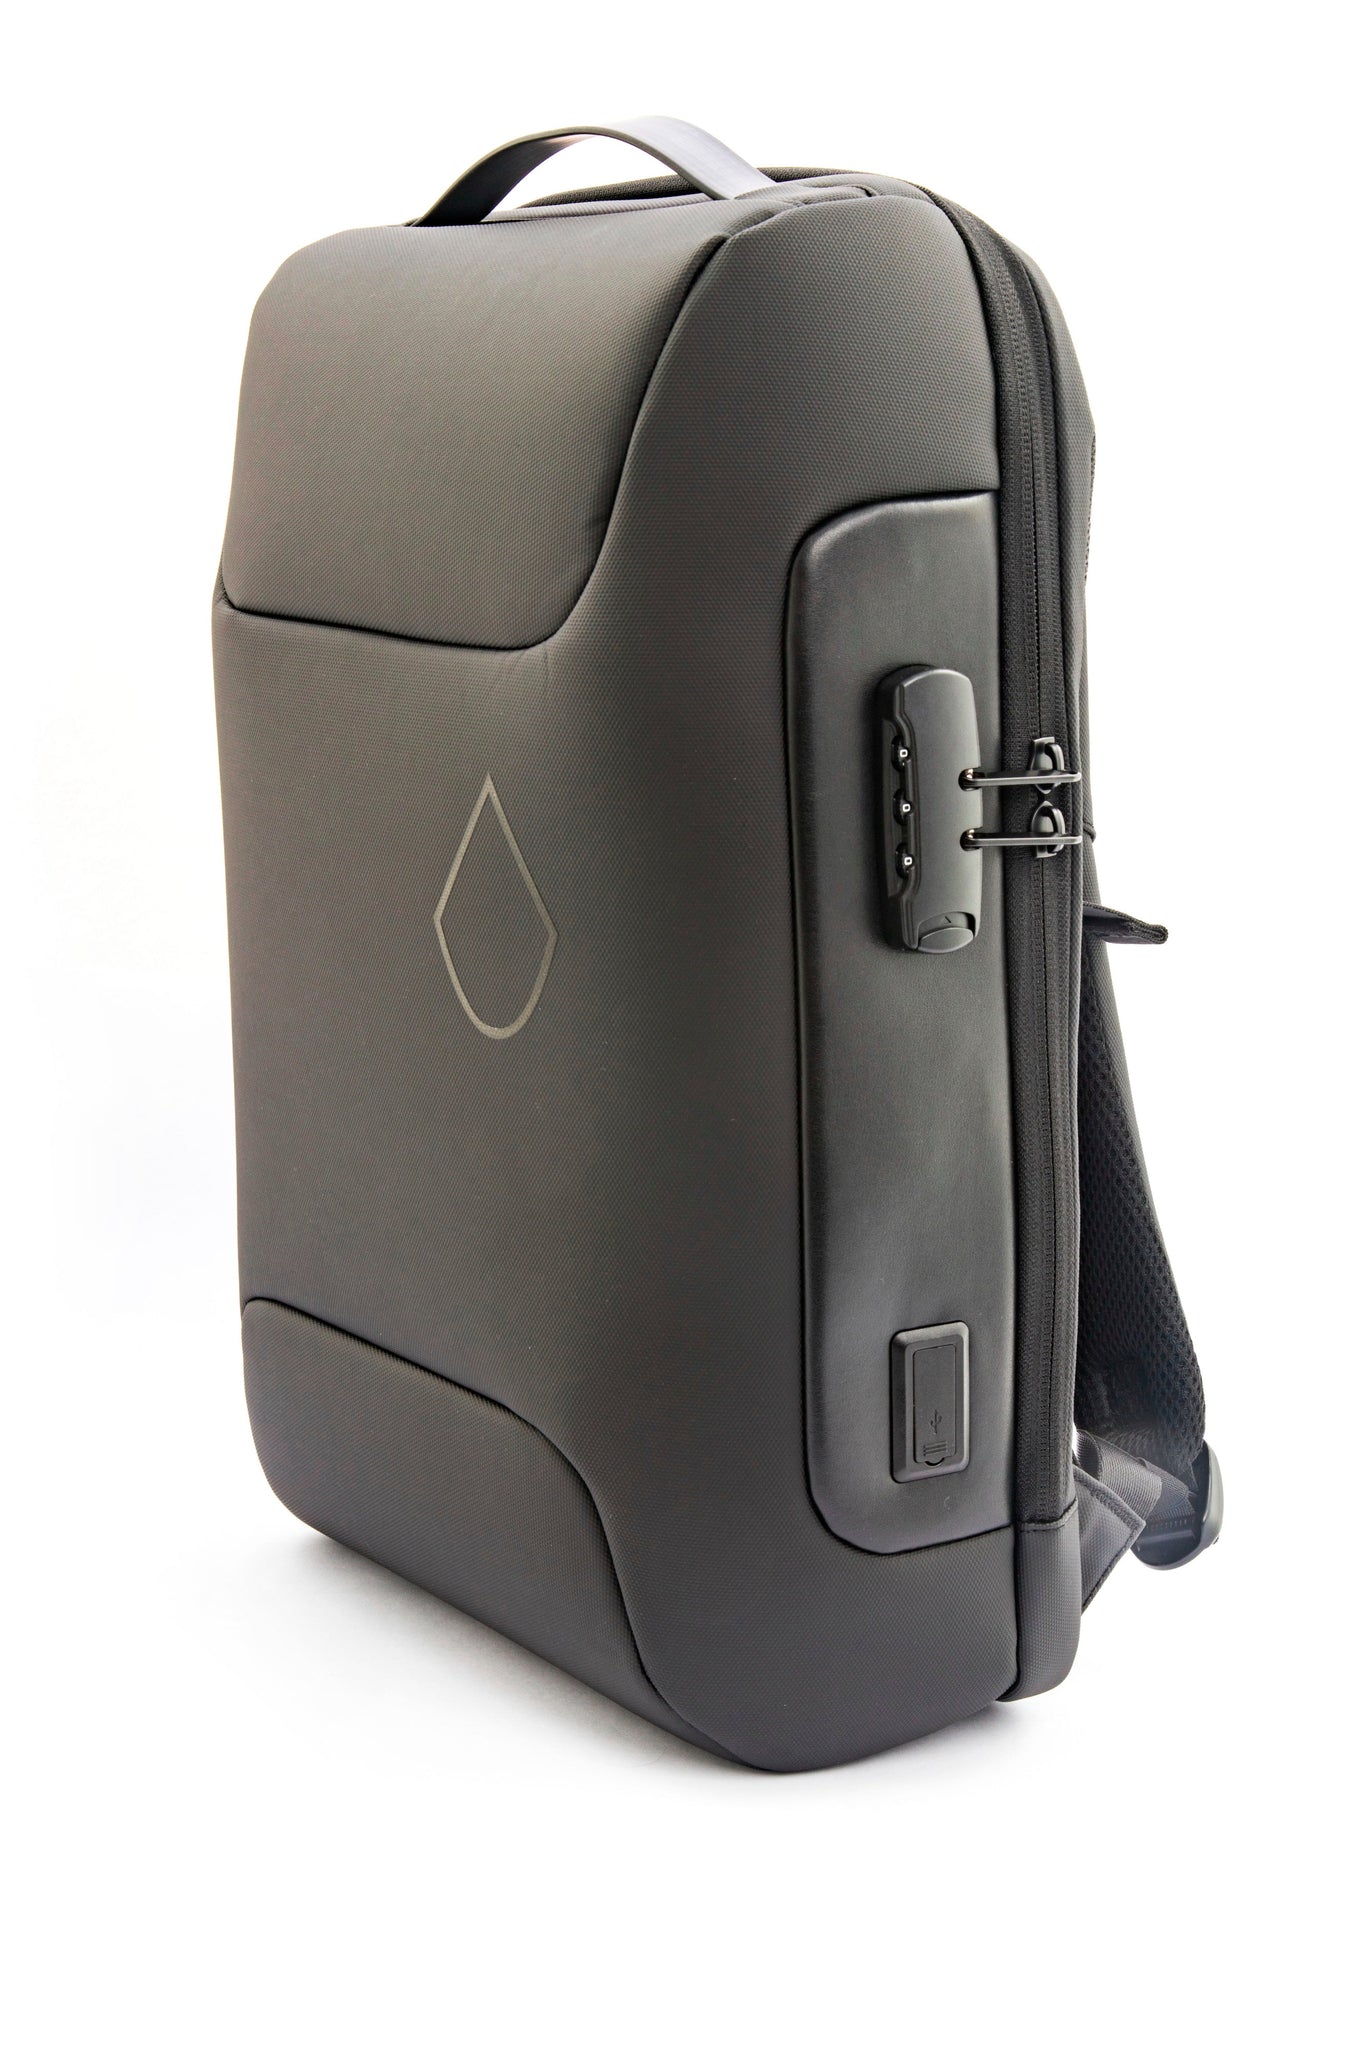 The Leitch Anti-Theft Backpack